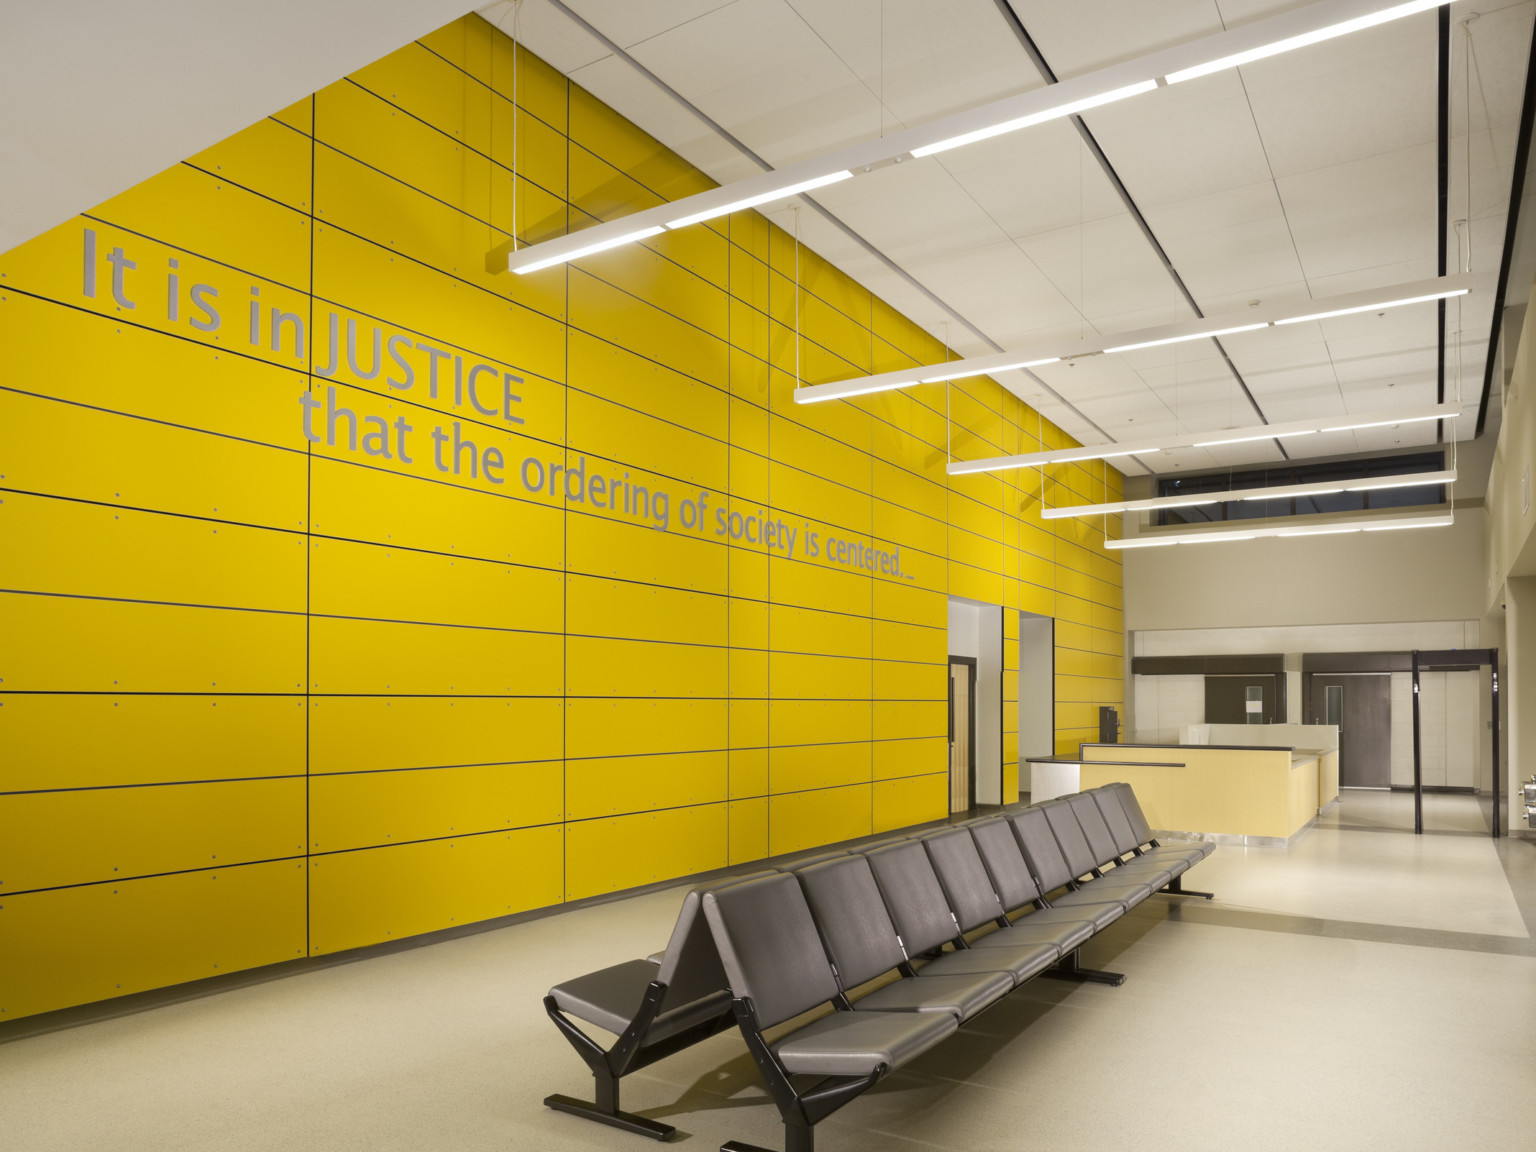 Seating area in lobby with yellow accent wall. A sign on wall reads It is in JUSTICE that the ordering of society is centered